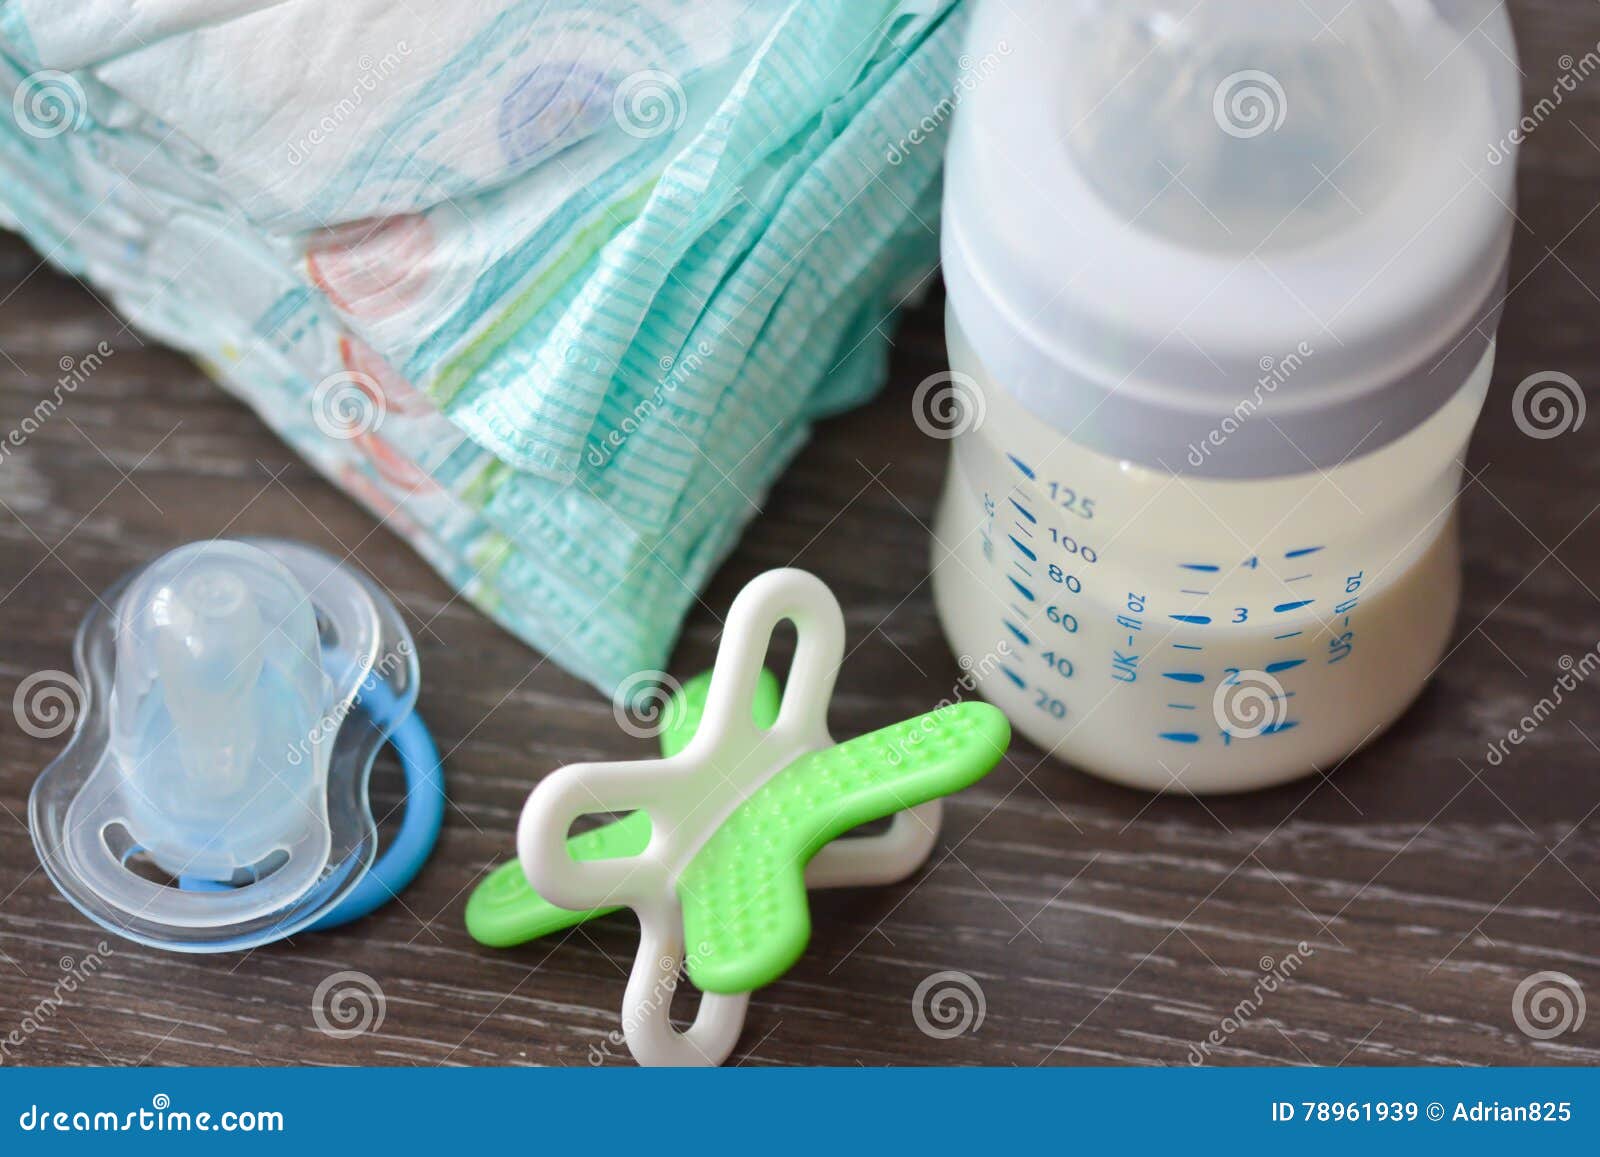 Diapers, Milk Bottle and a Pacifier Stock Image - Image of child, baby ...